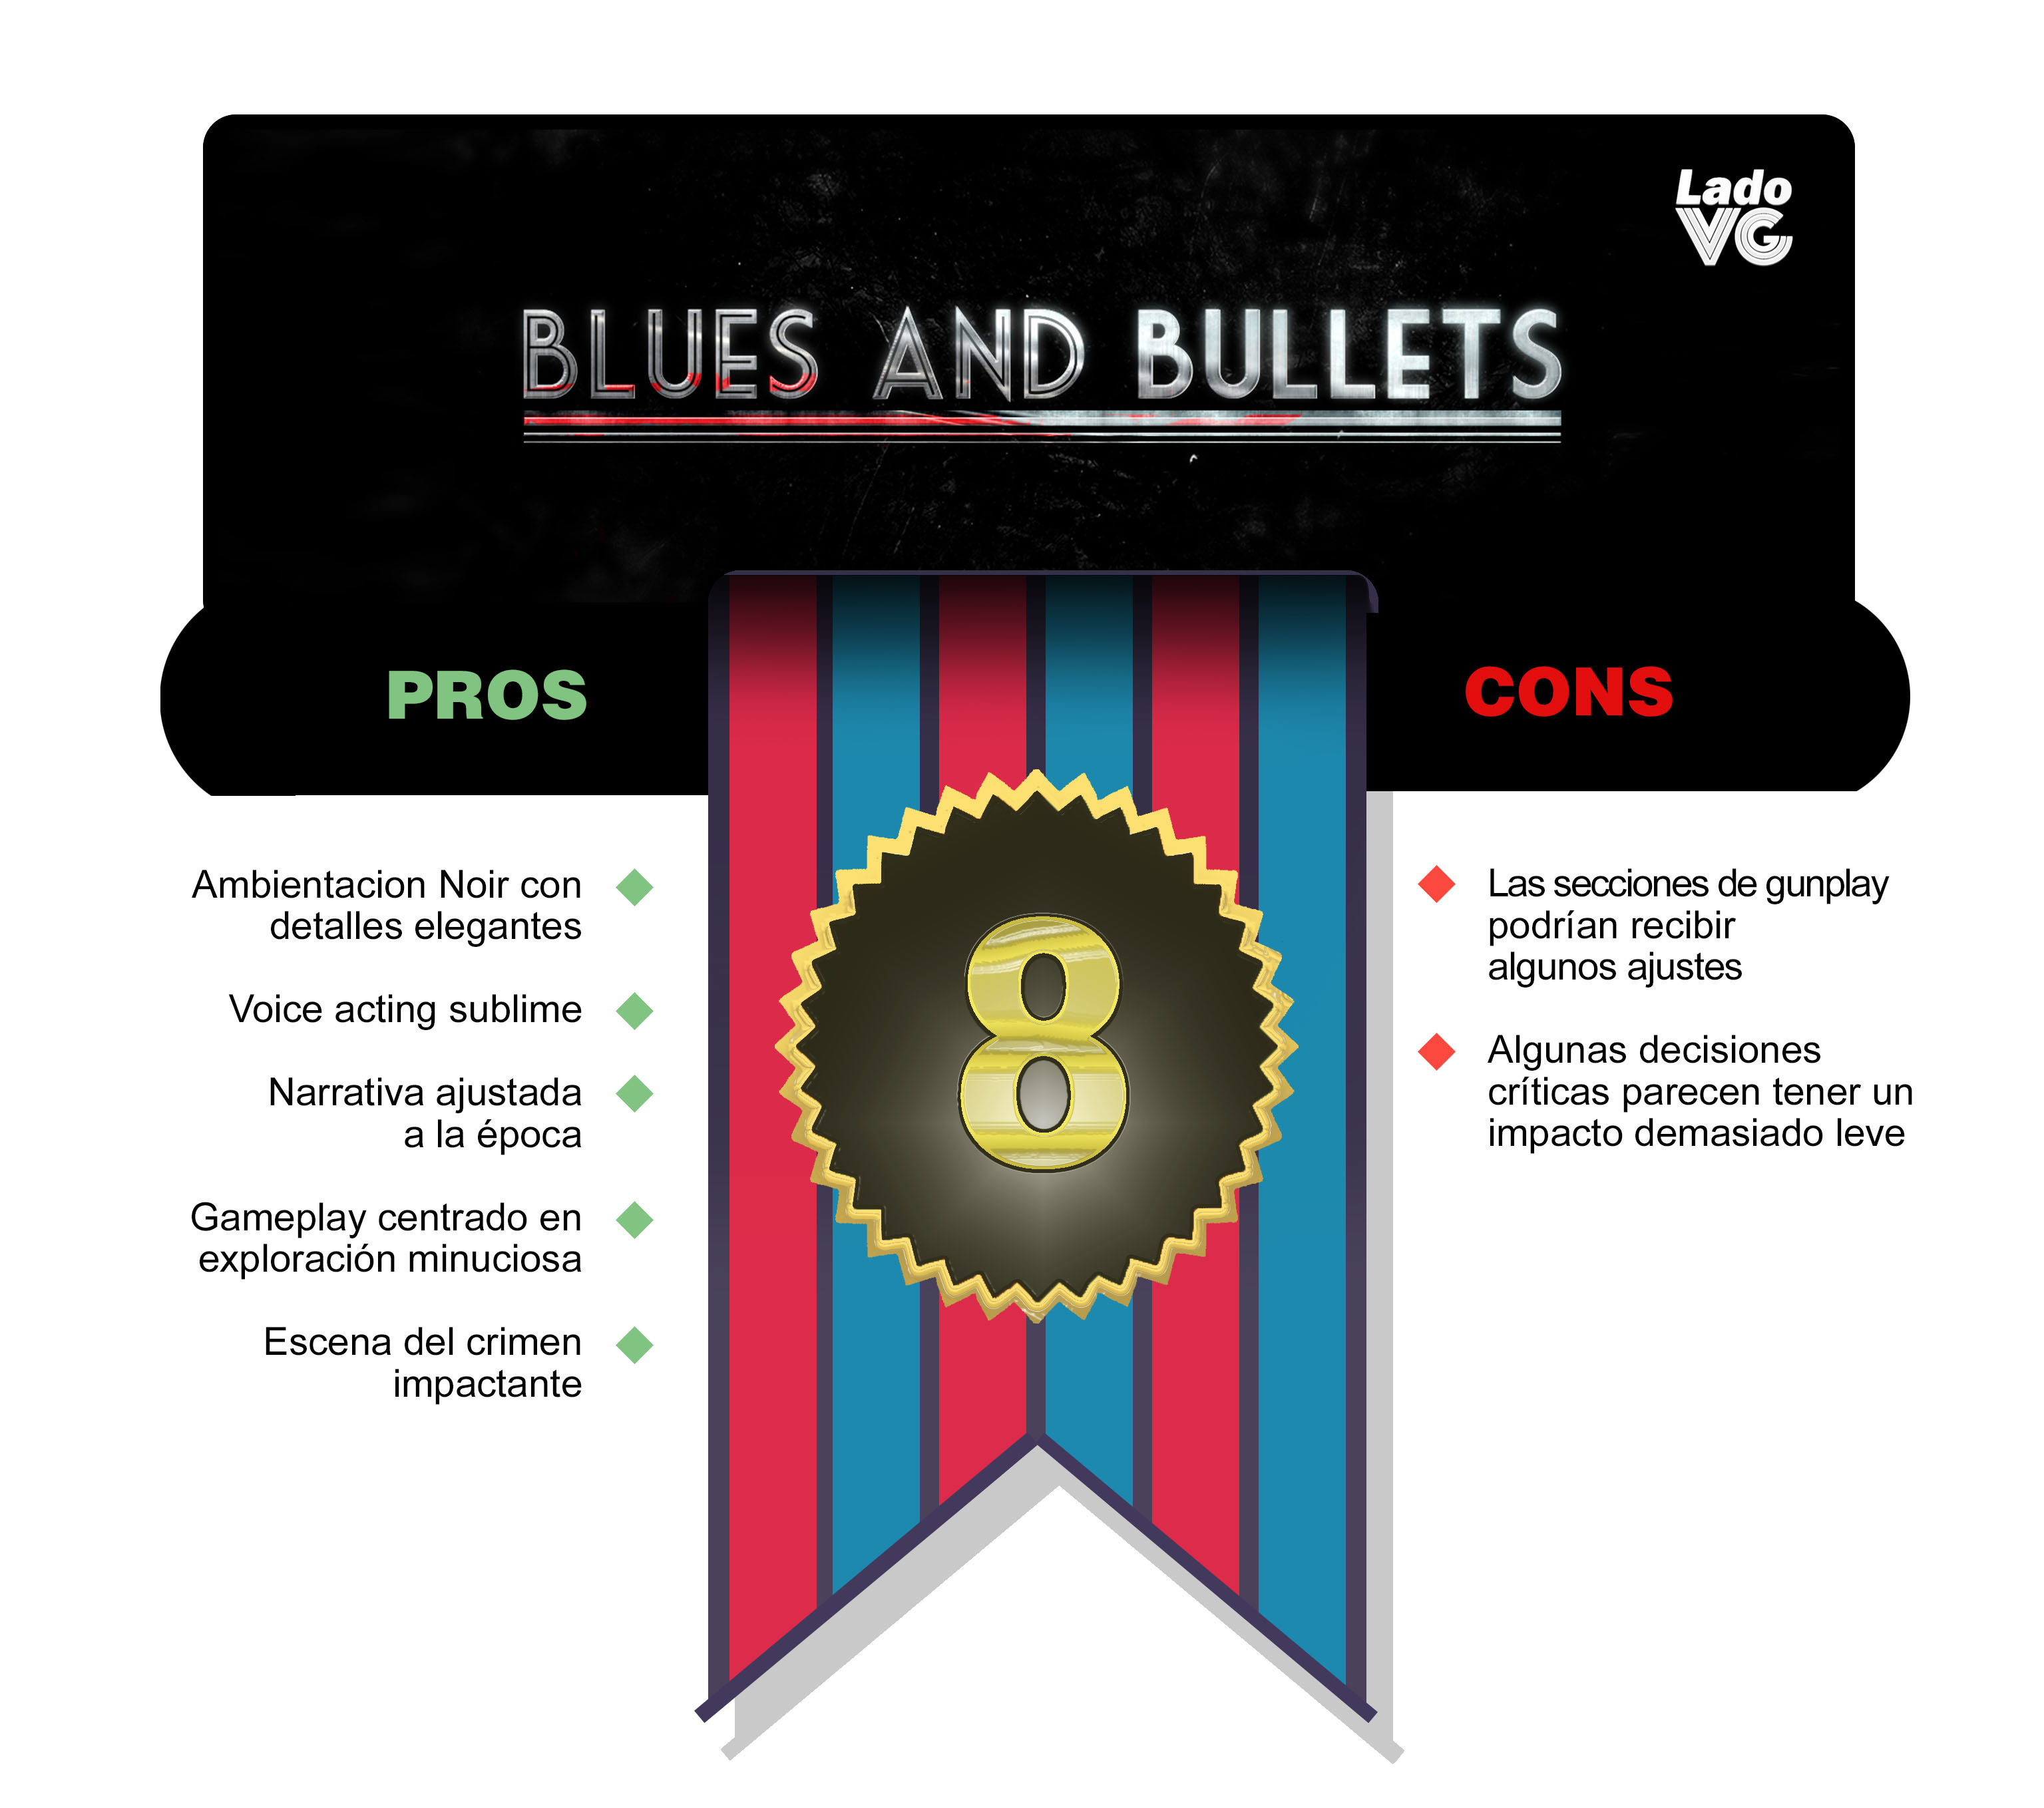 blues and bullets